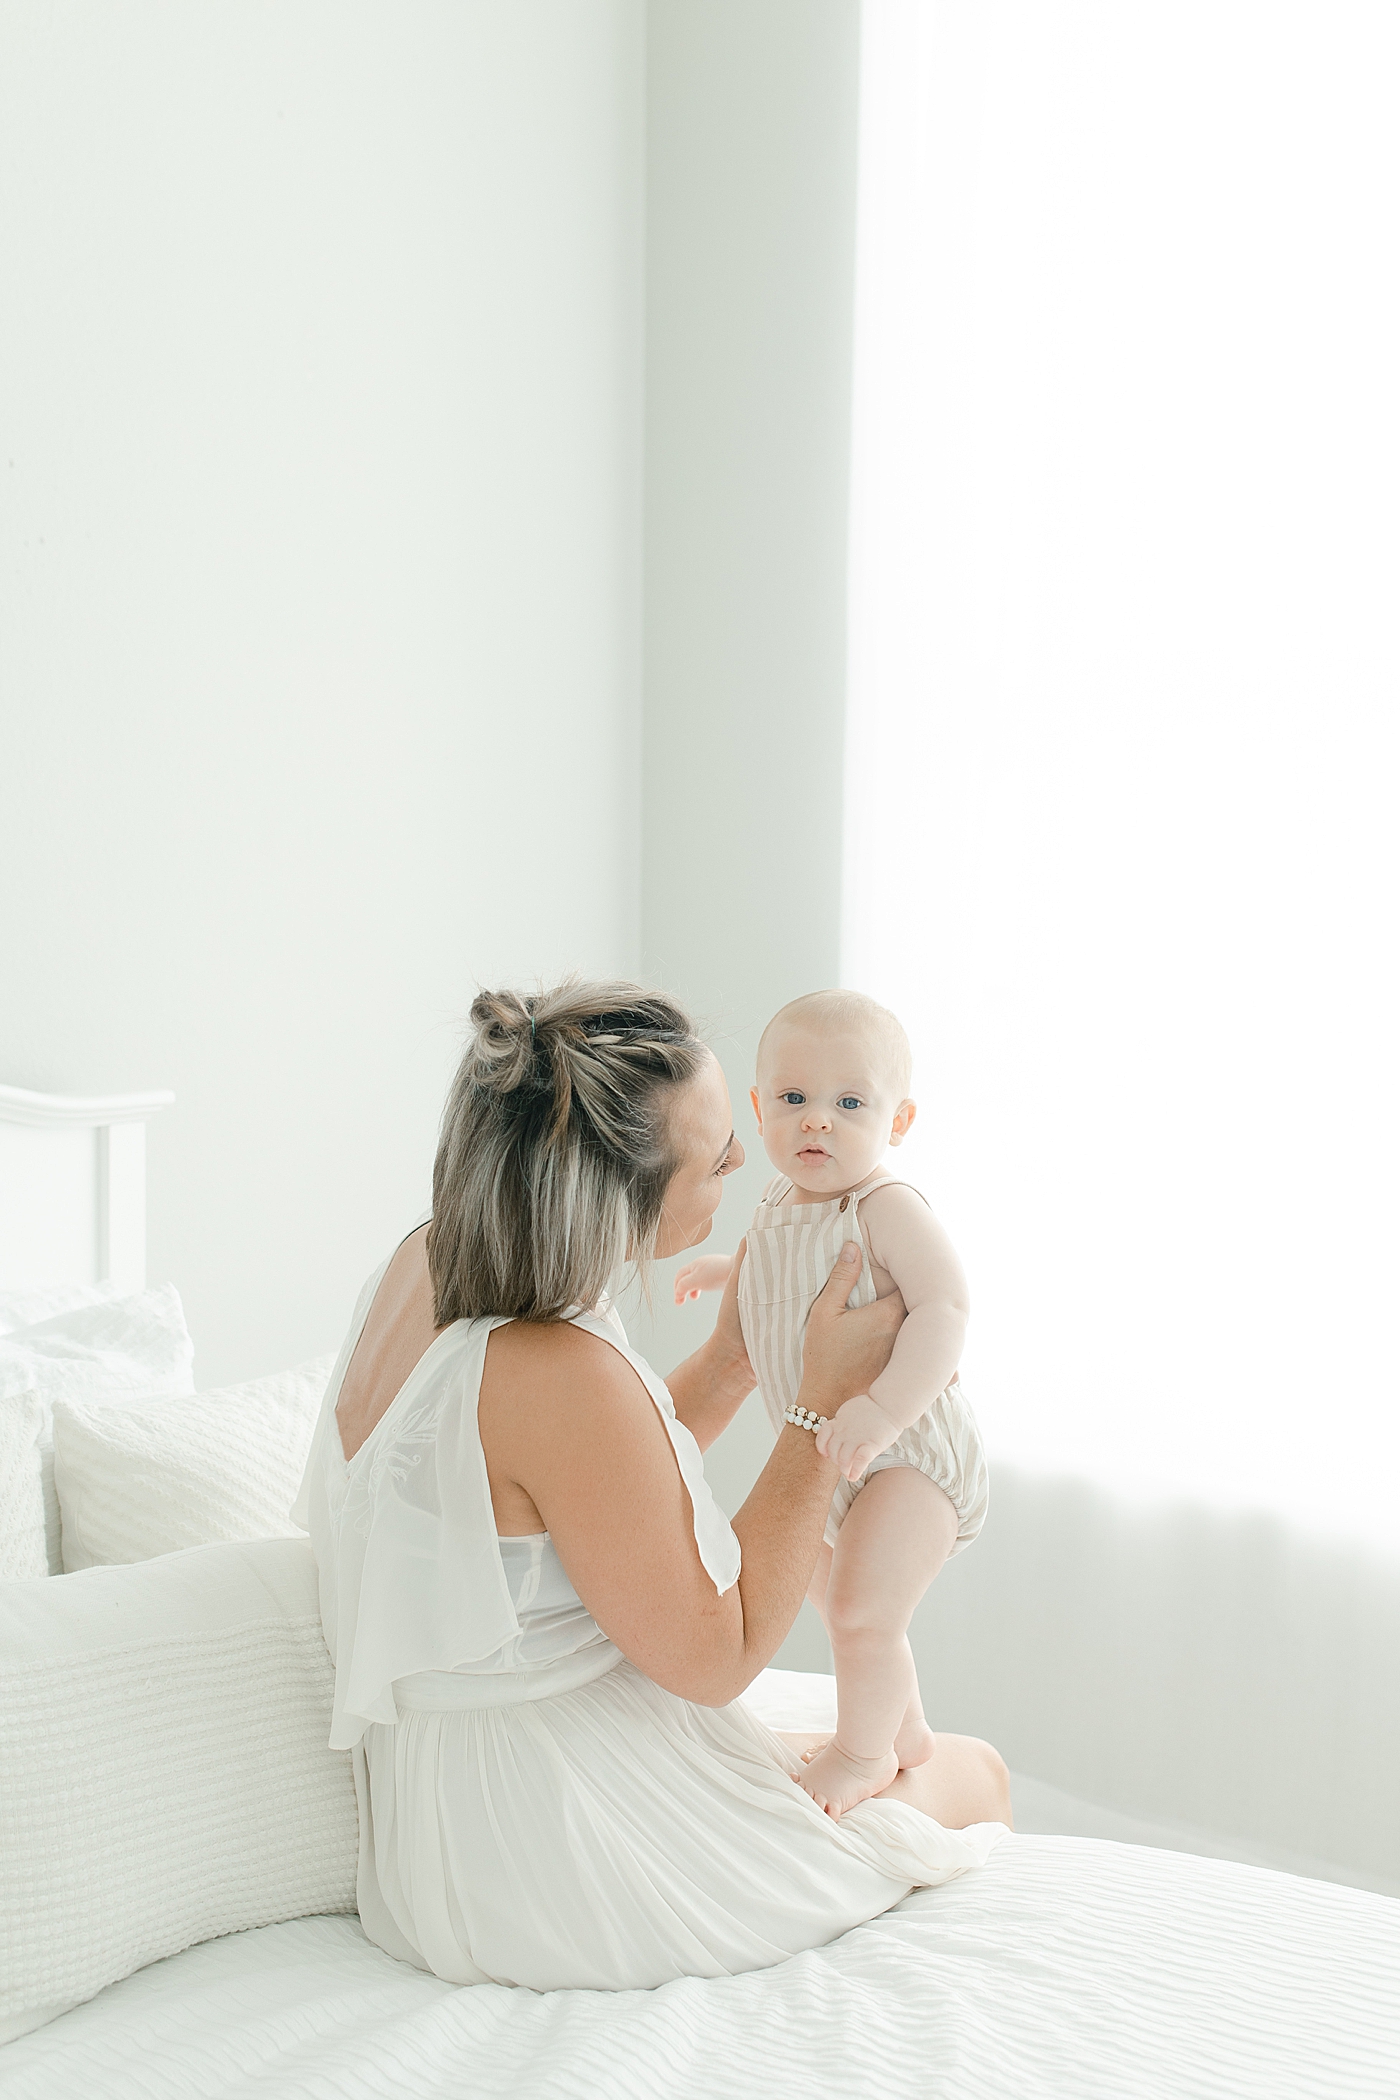 Mom sitting on a bed in white dress snuggling her baby boy | Photo by Hattiesburg Baby Photographer Little Sunshine Photography